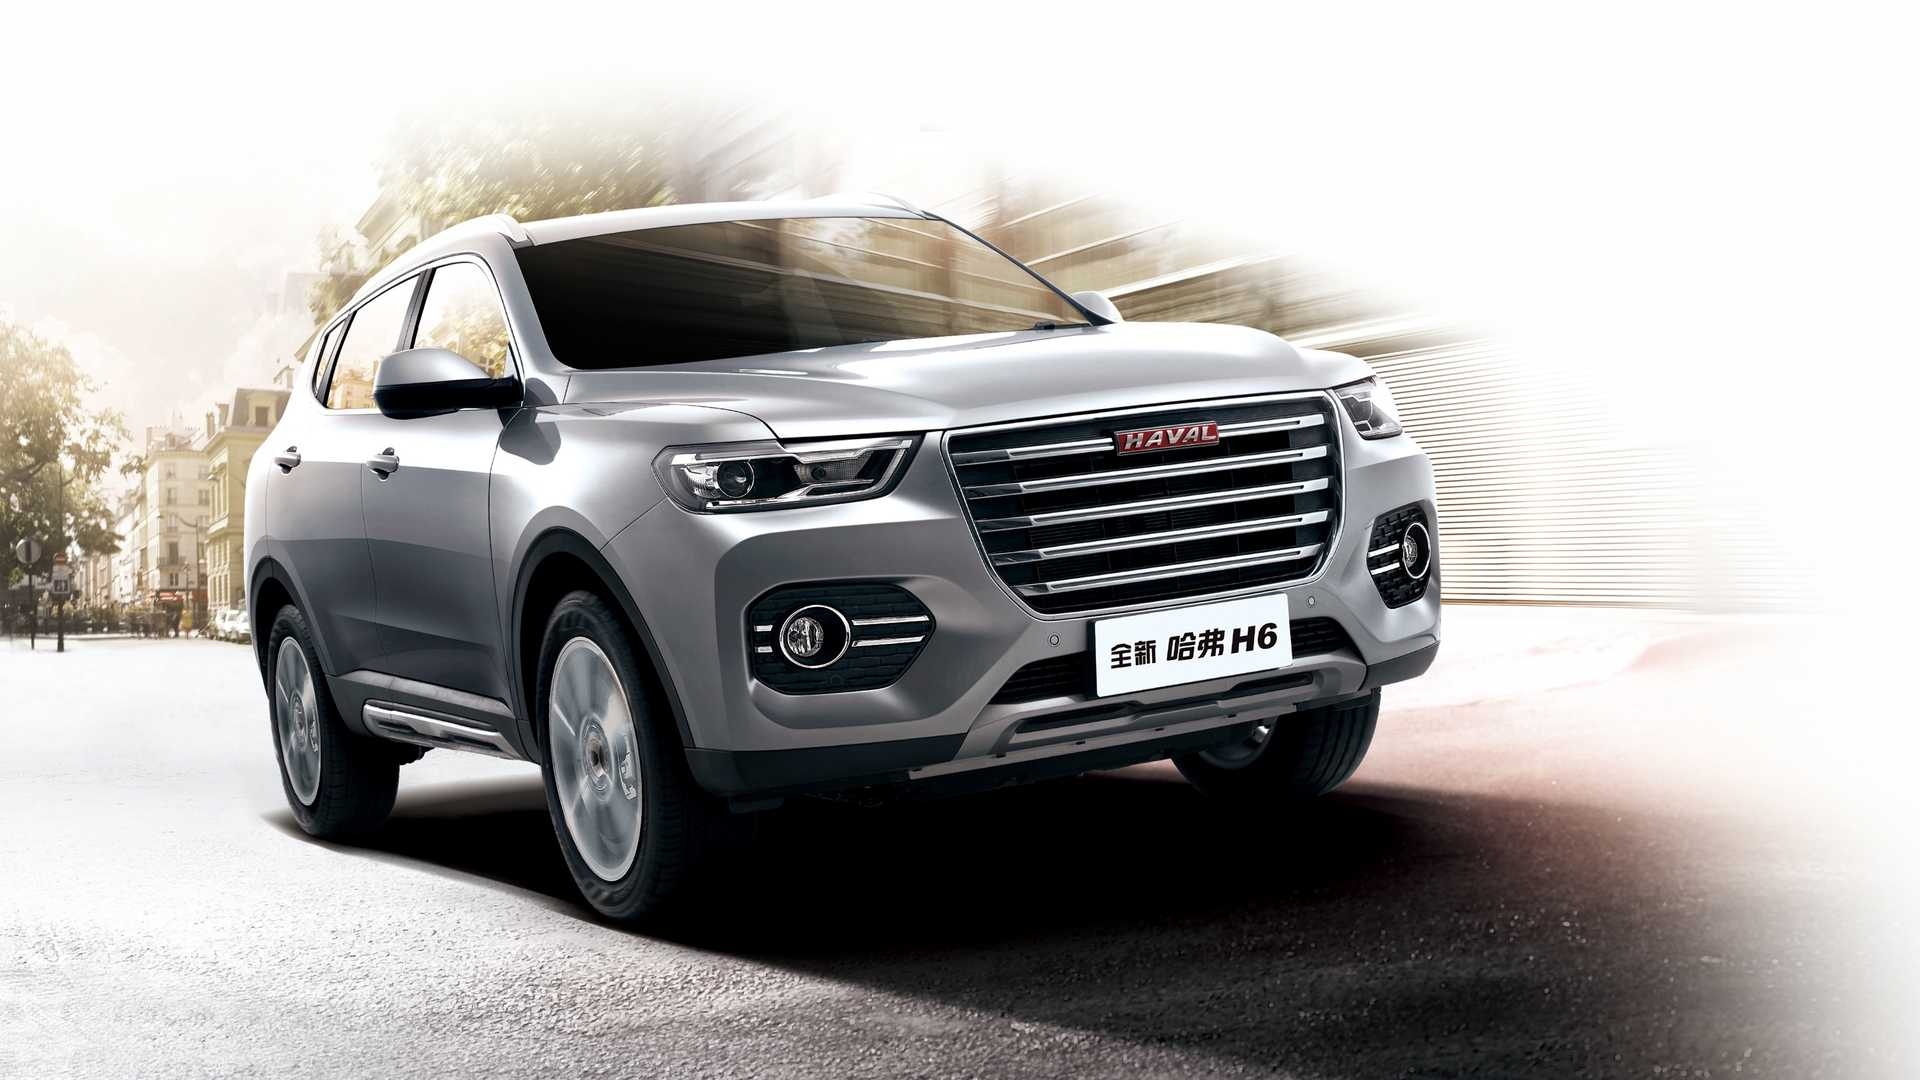 Haval H6, Audi Q7, Chinese SUV, Affordable, 1920x1080 Full HD Desktop